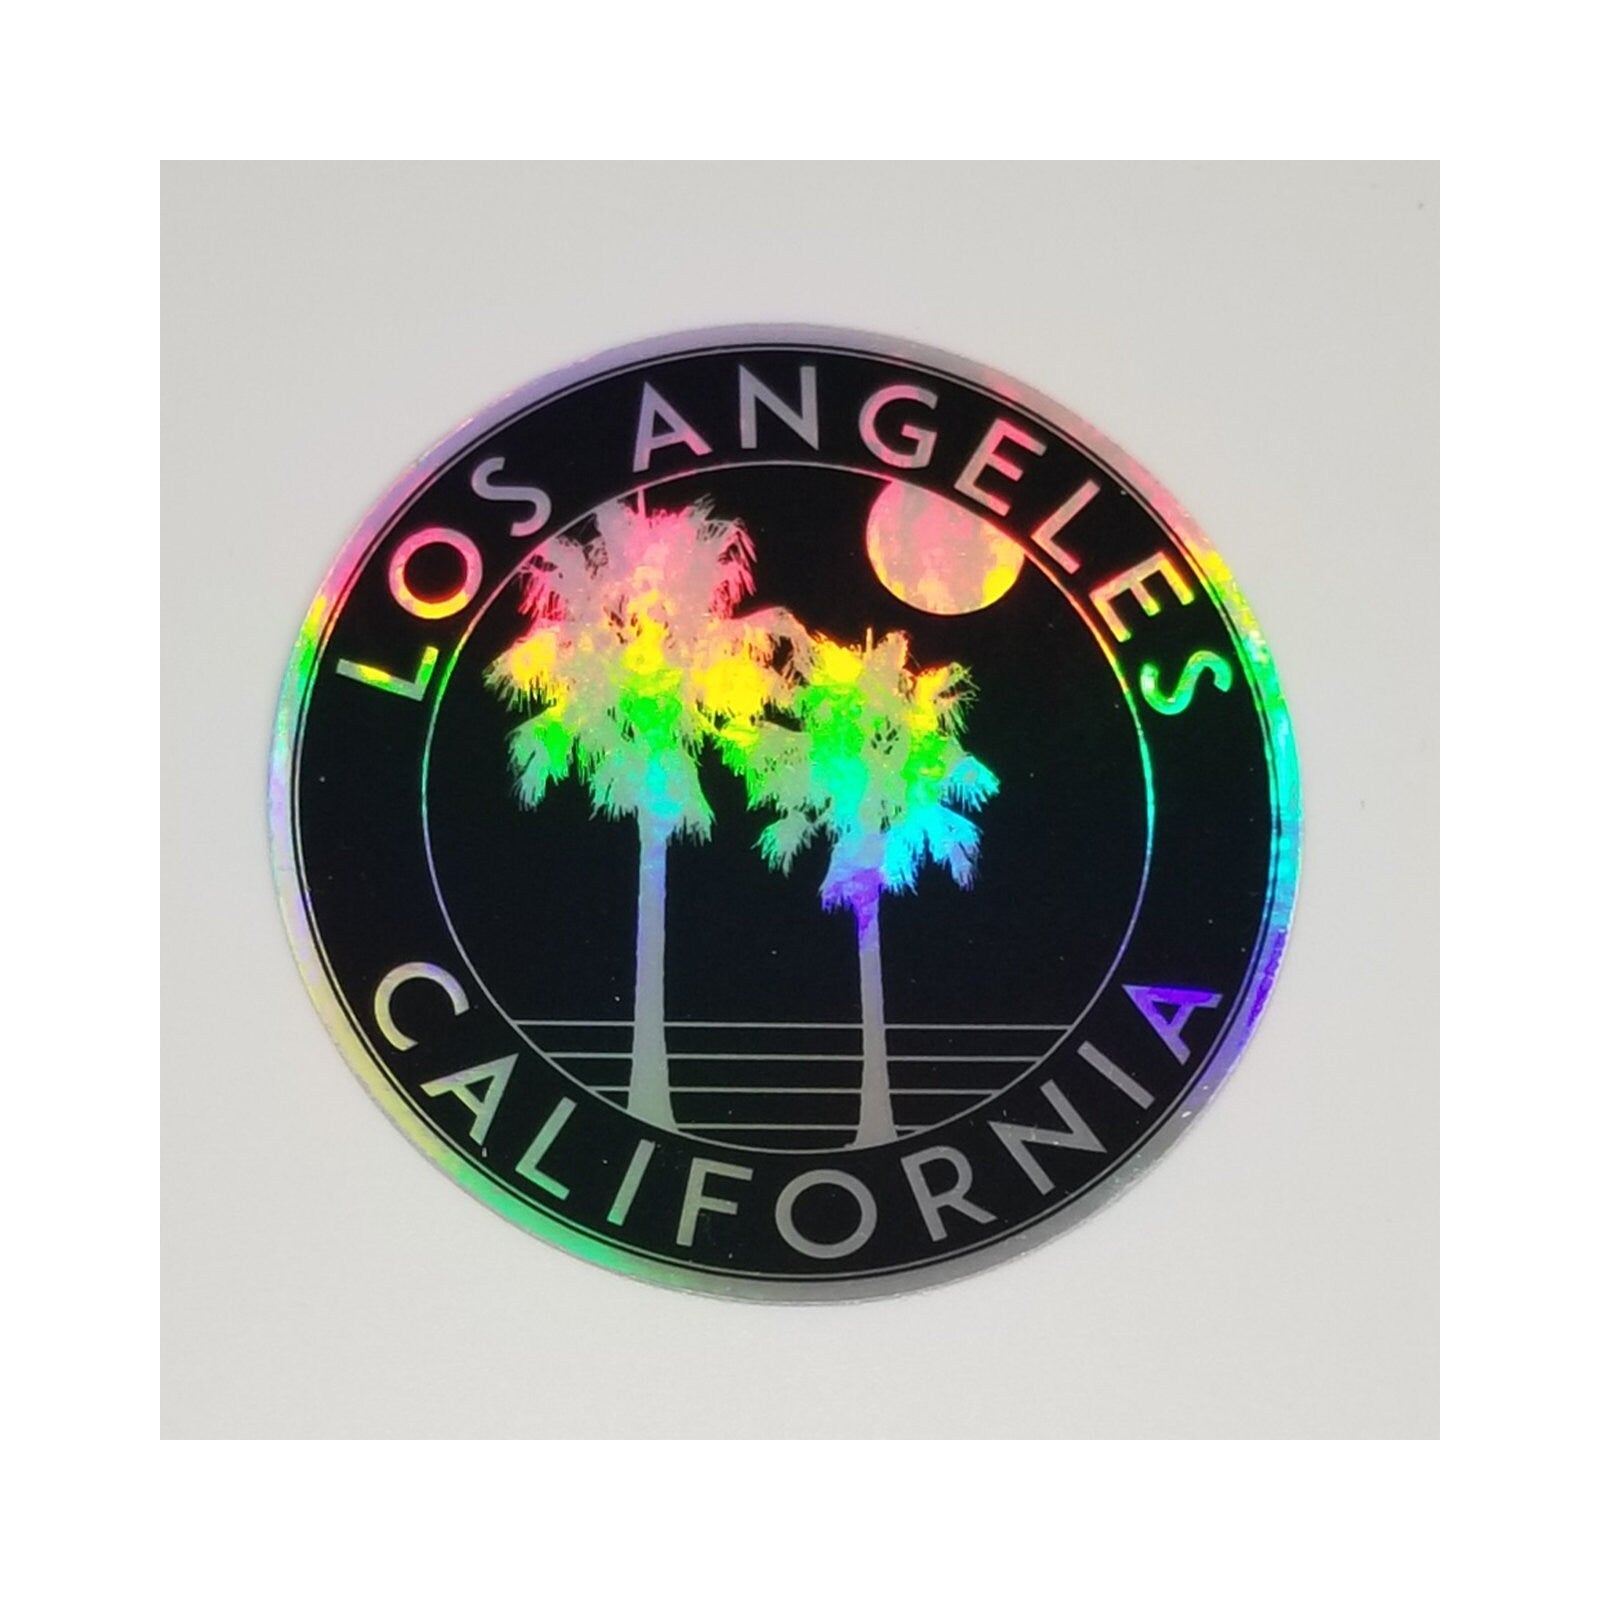 Los Angeles California Hologram Decal Sticker 3" Holographic